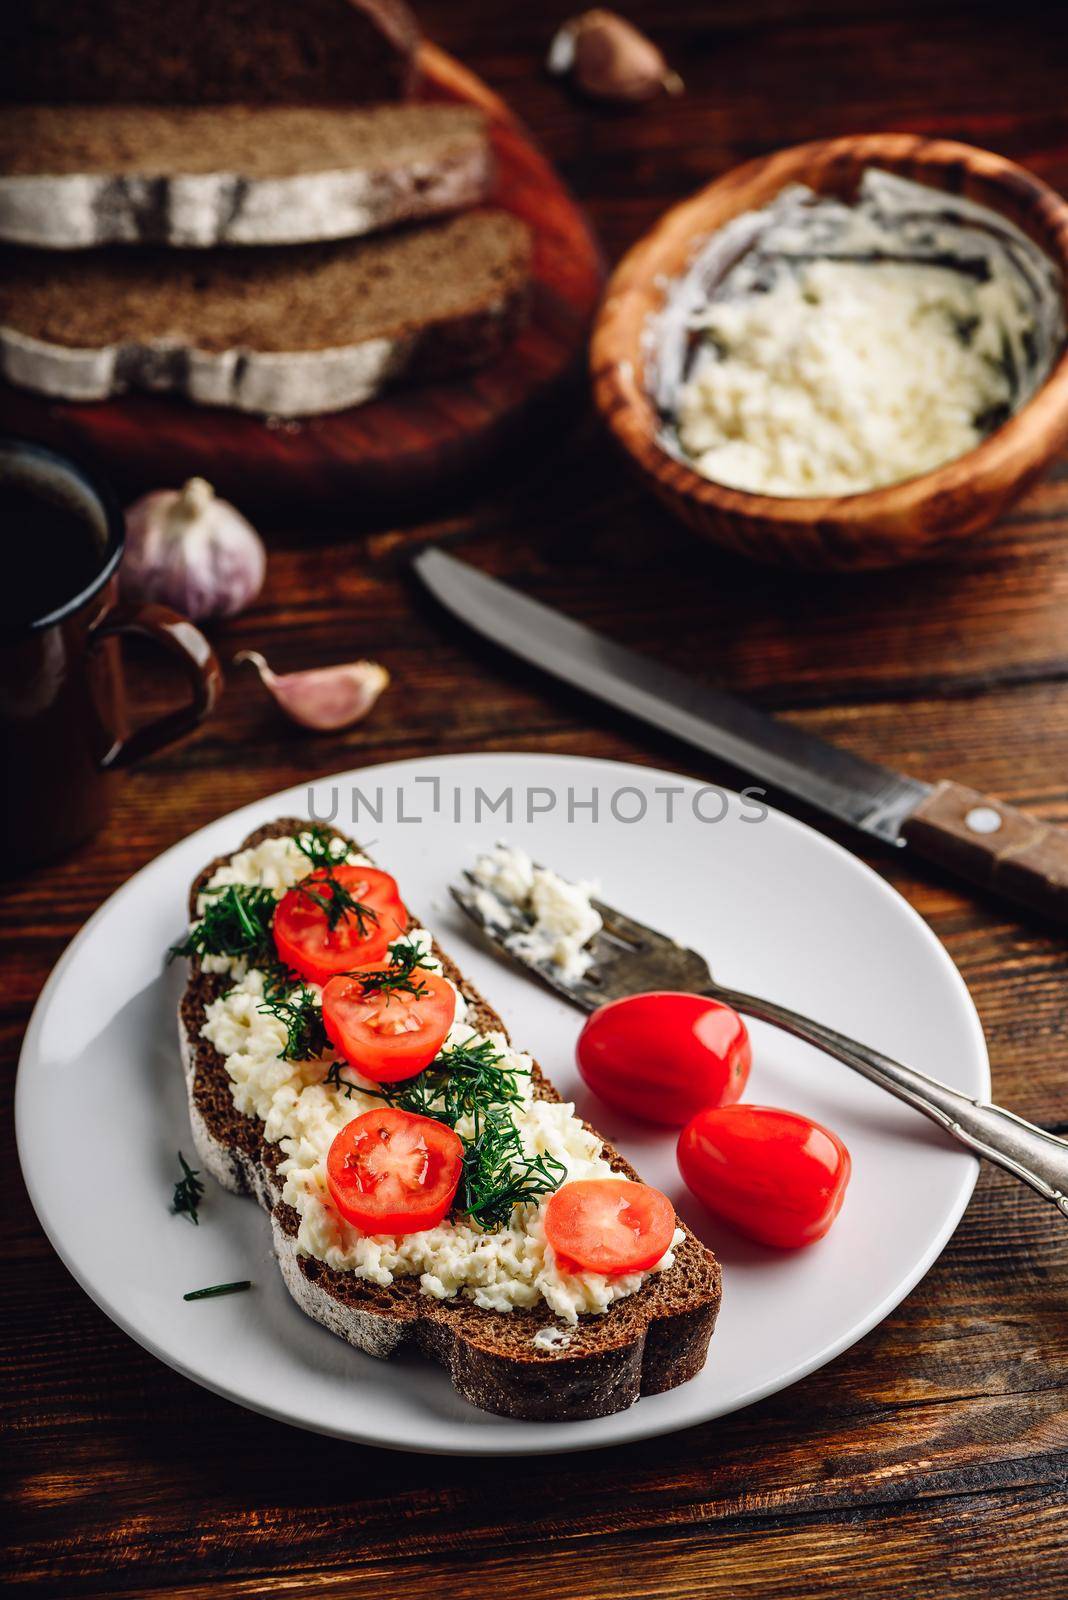 Rye bread toast with processed cheese, garlic and sliced cherry tomatoes